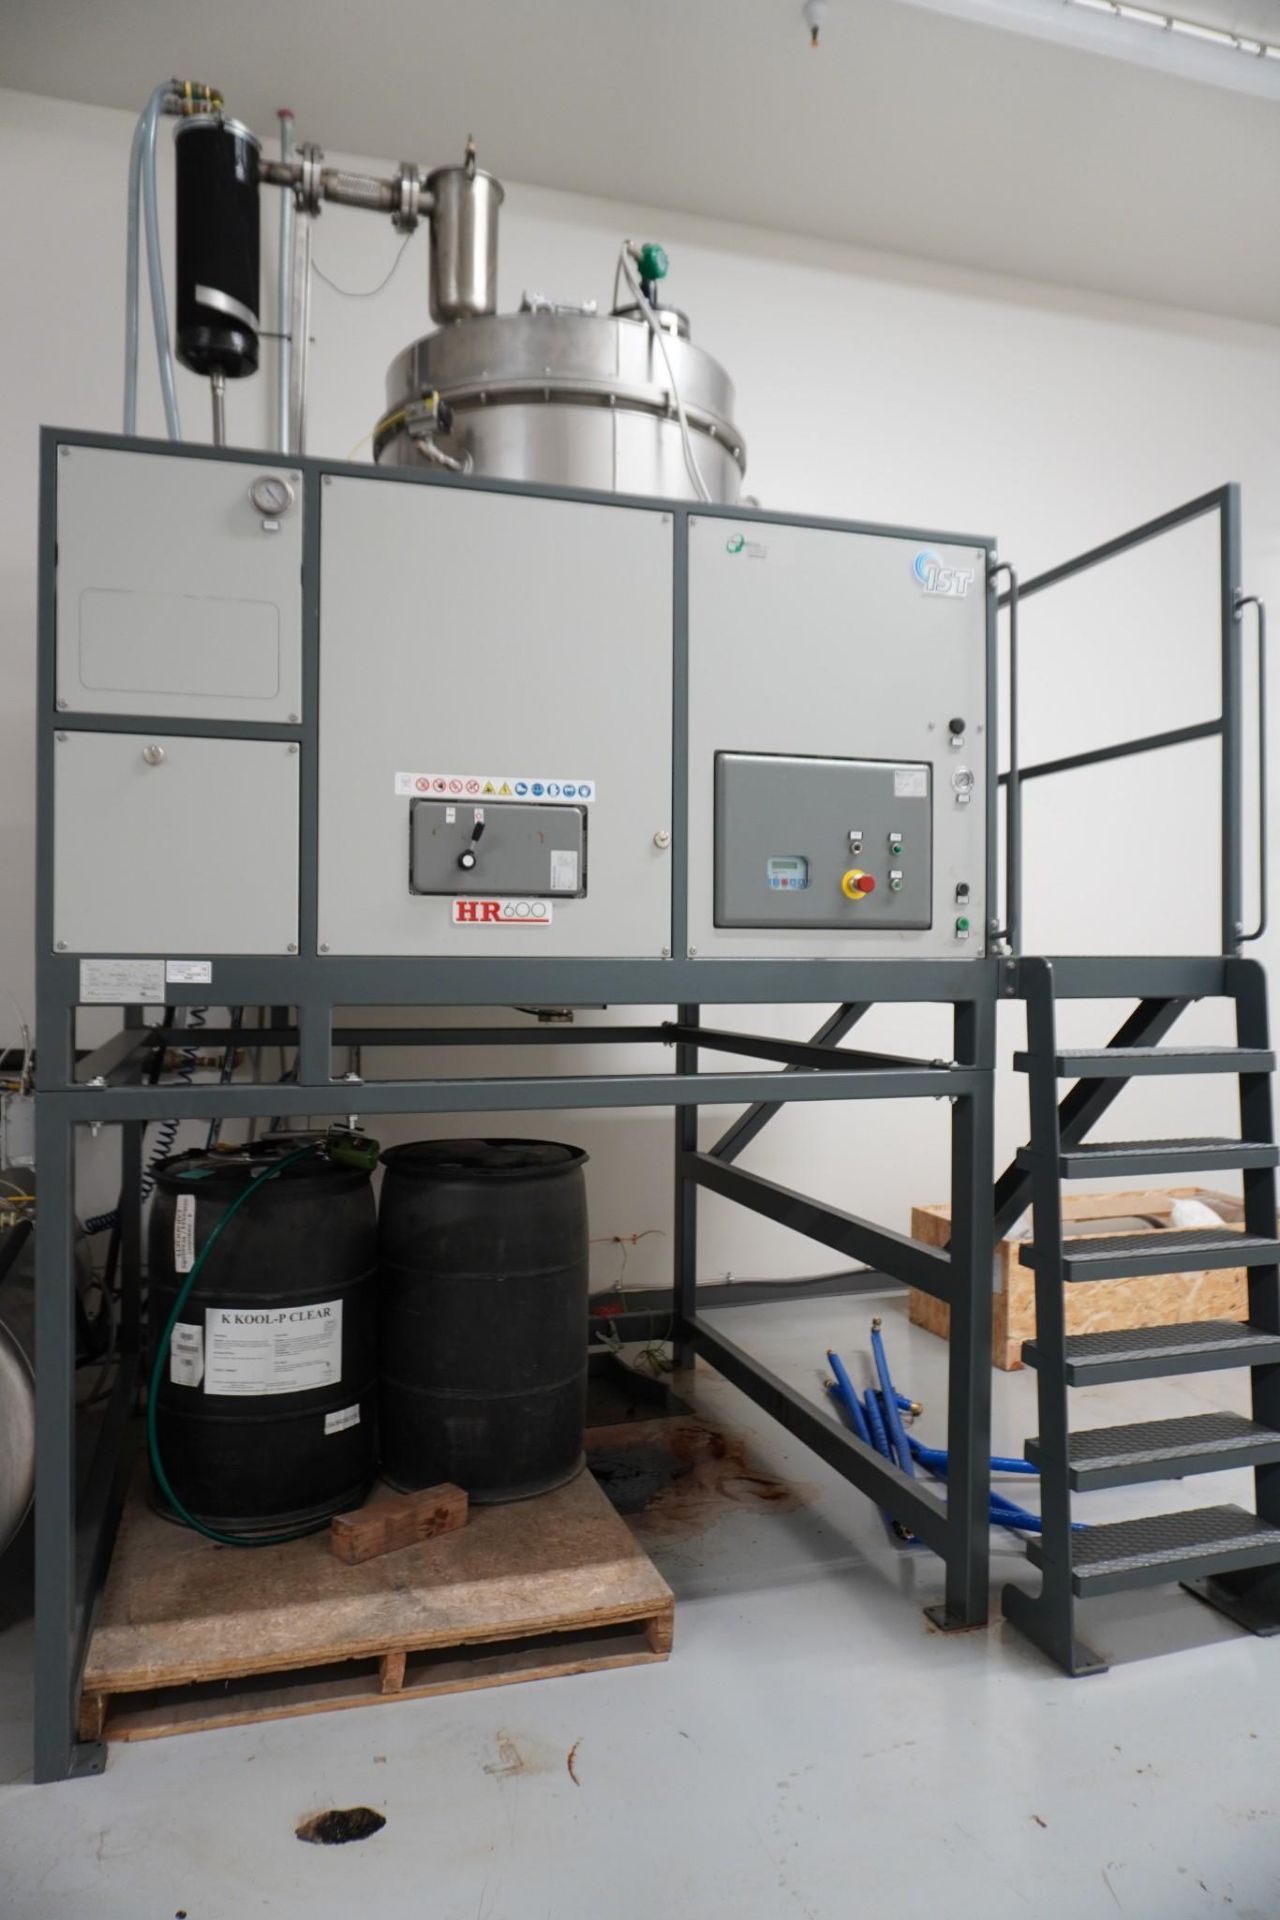 USED IST HR 600 AUTOMATED SOLVENT RECOVERY SYSTEM - Image 3 of 6